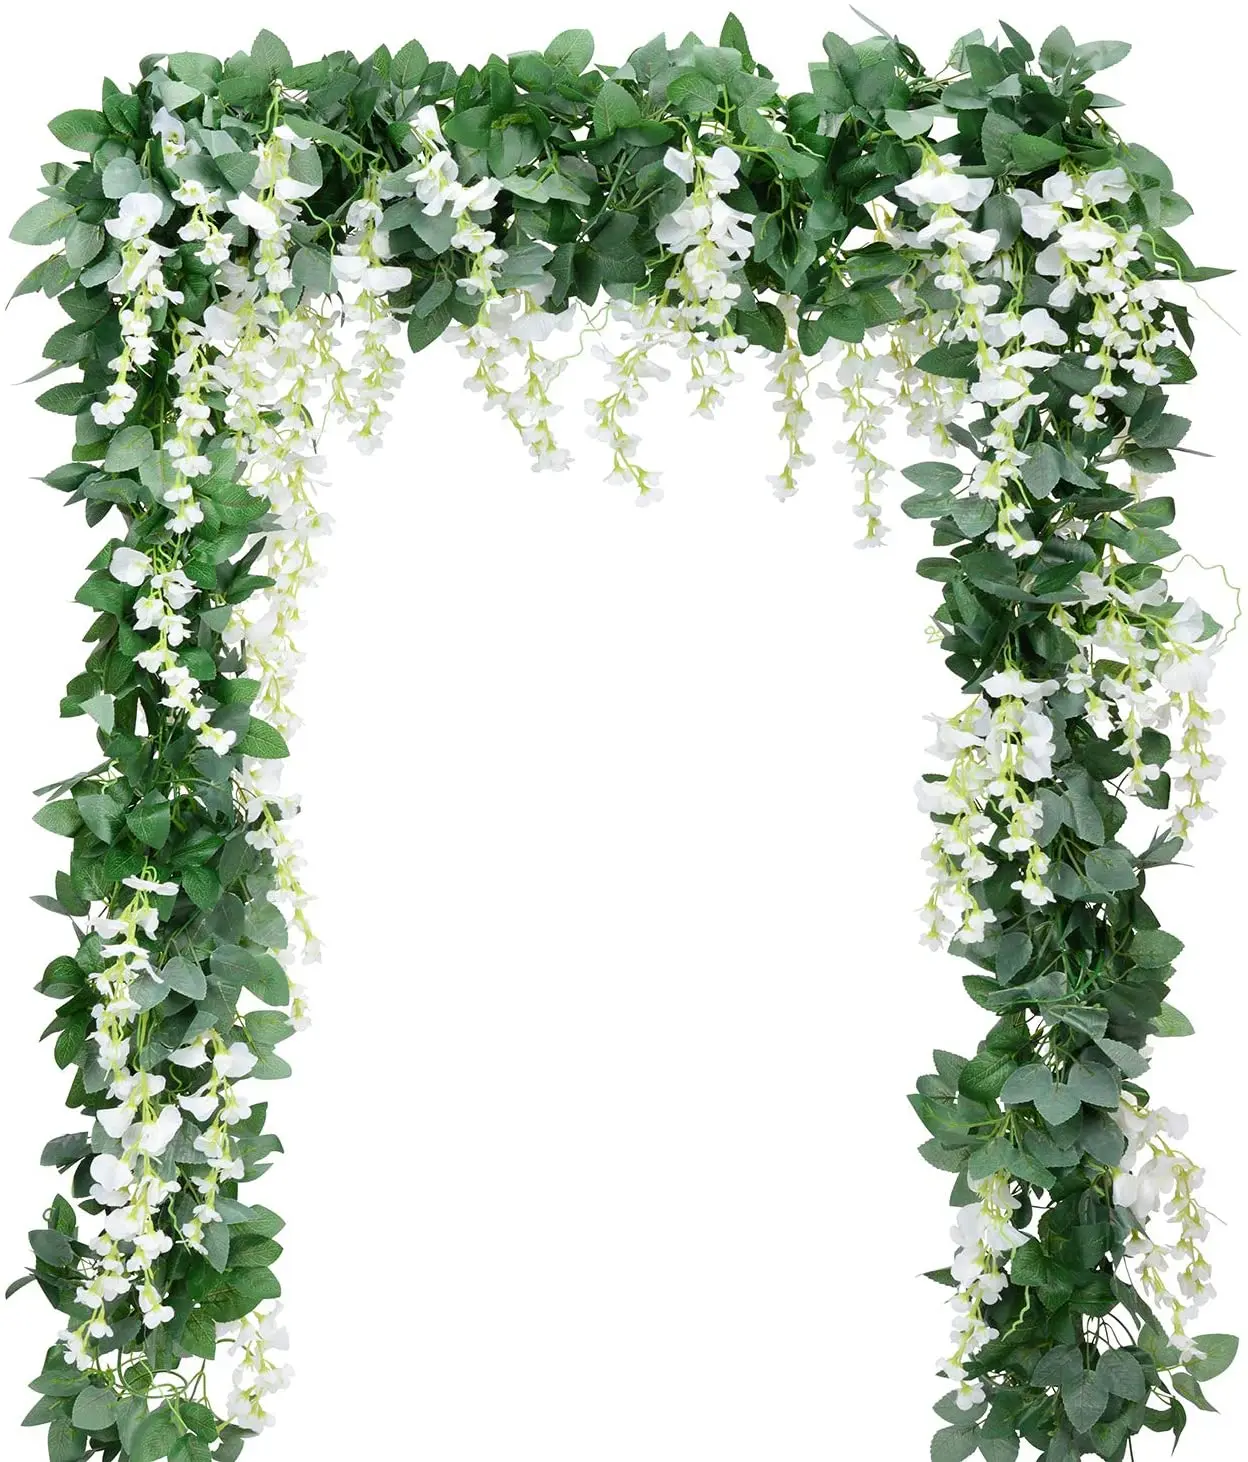 

Artificial Flowers Silk Wisteria Vine 5pcs 6.6ft/Piece Ivy Leaves Garland Wisteria Artificial Plants Greenery Fake Hanging Vines